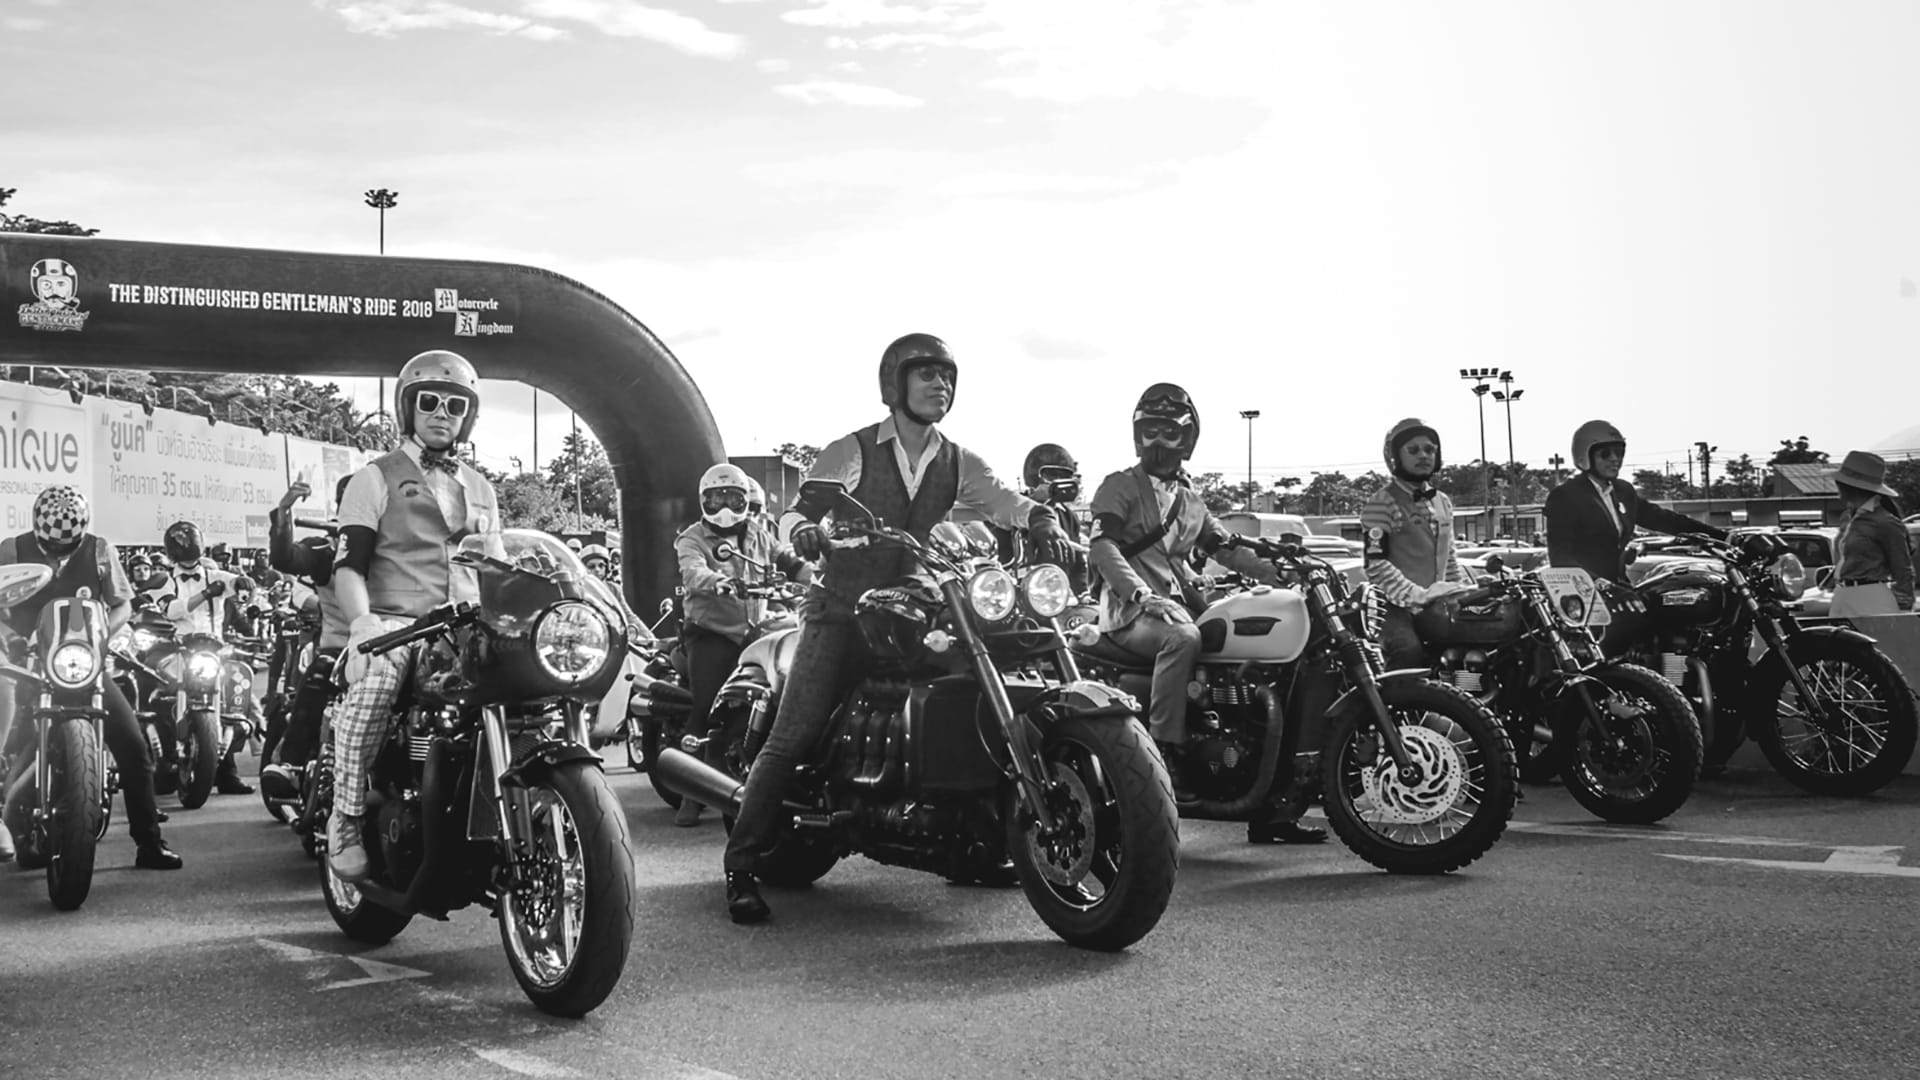 Triumph riders ready at the start line for the Distinguished Gentlemen's Ride in Thailand